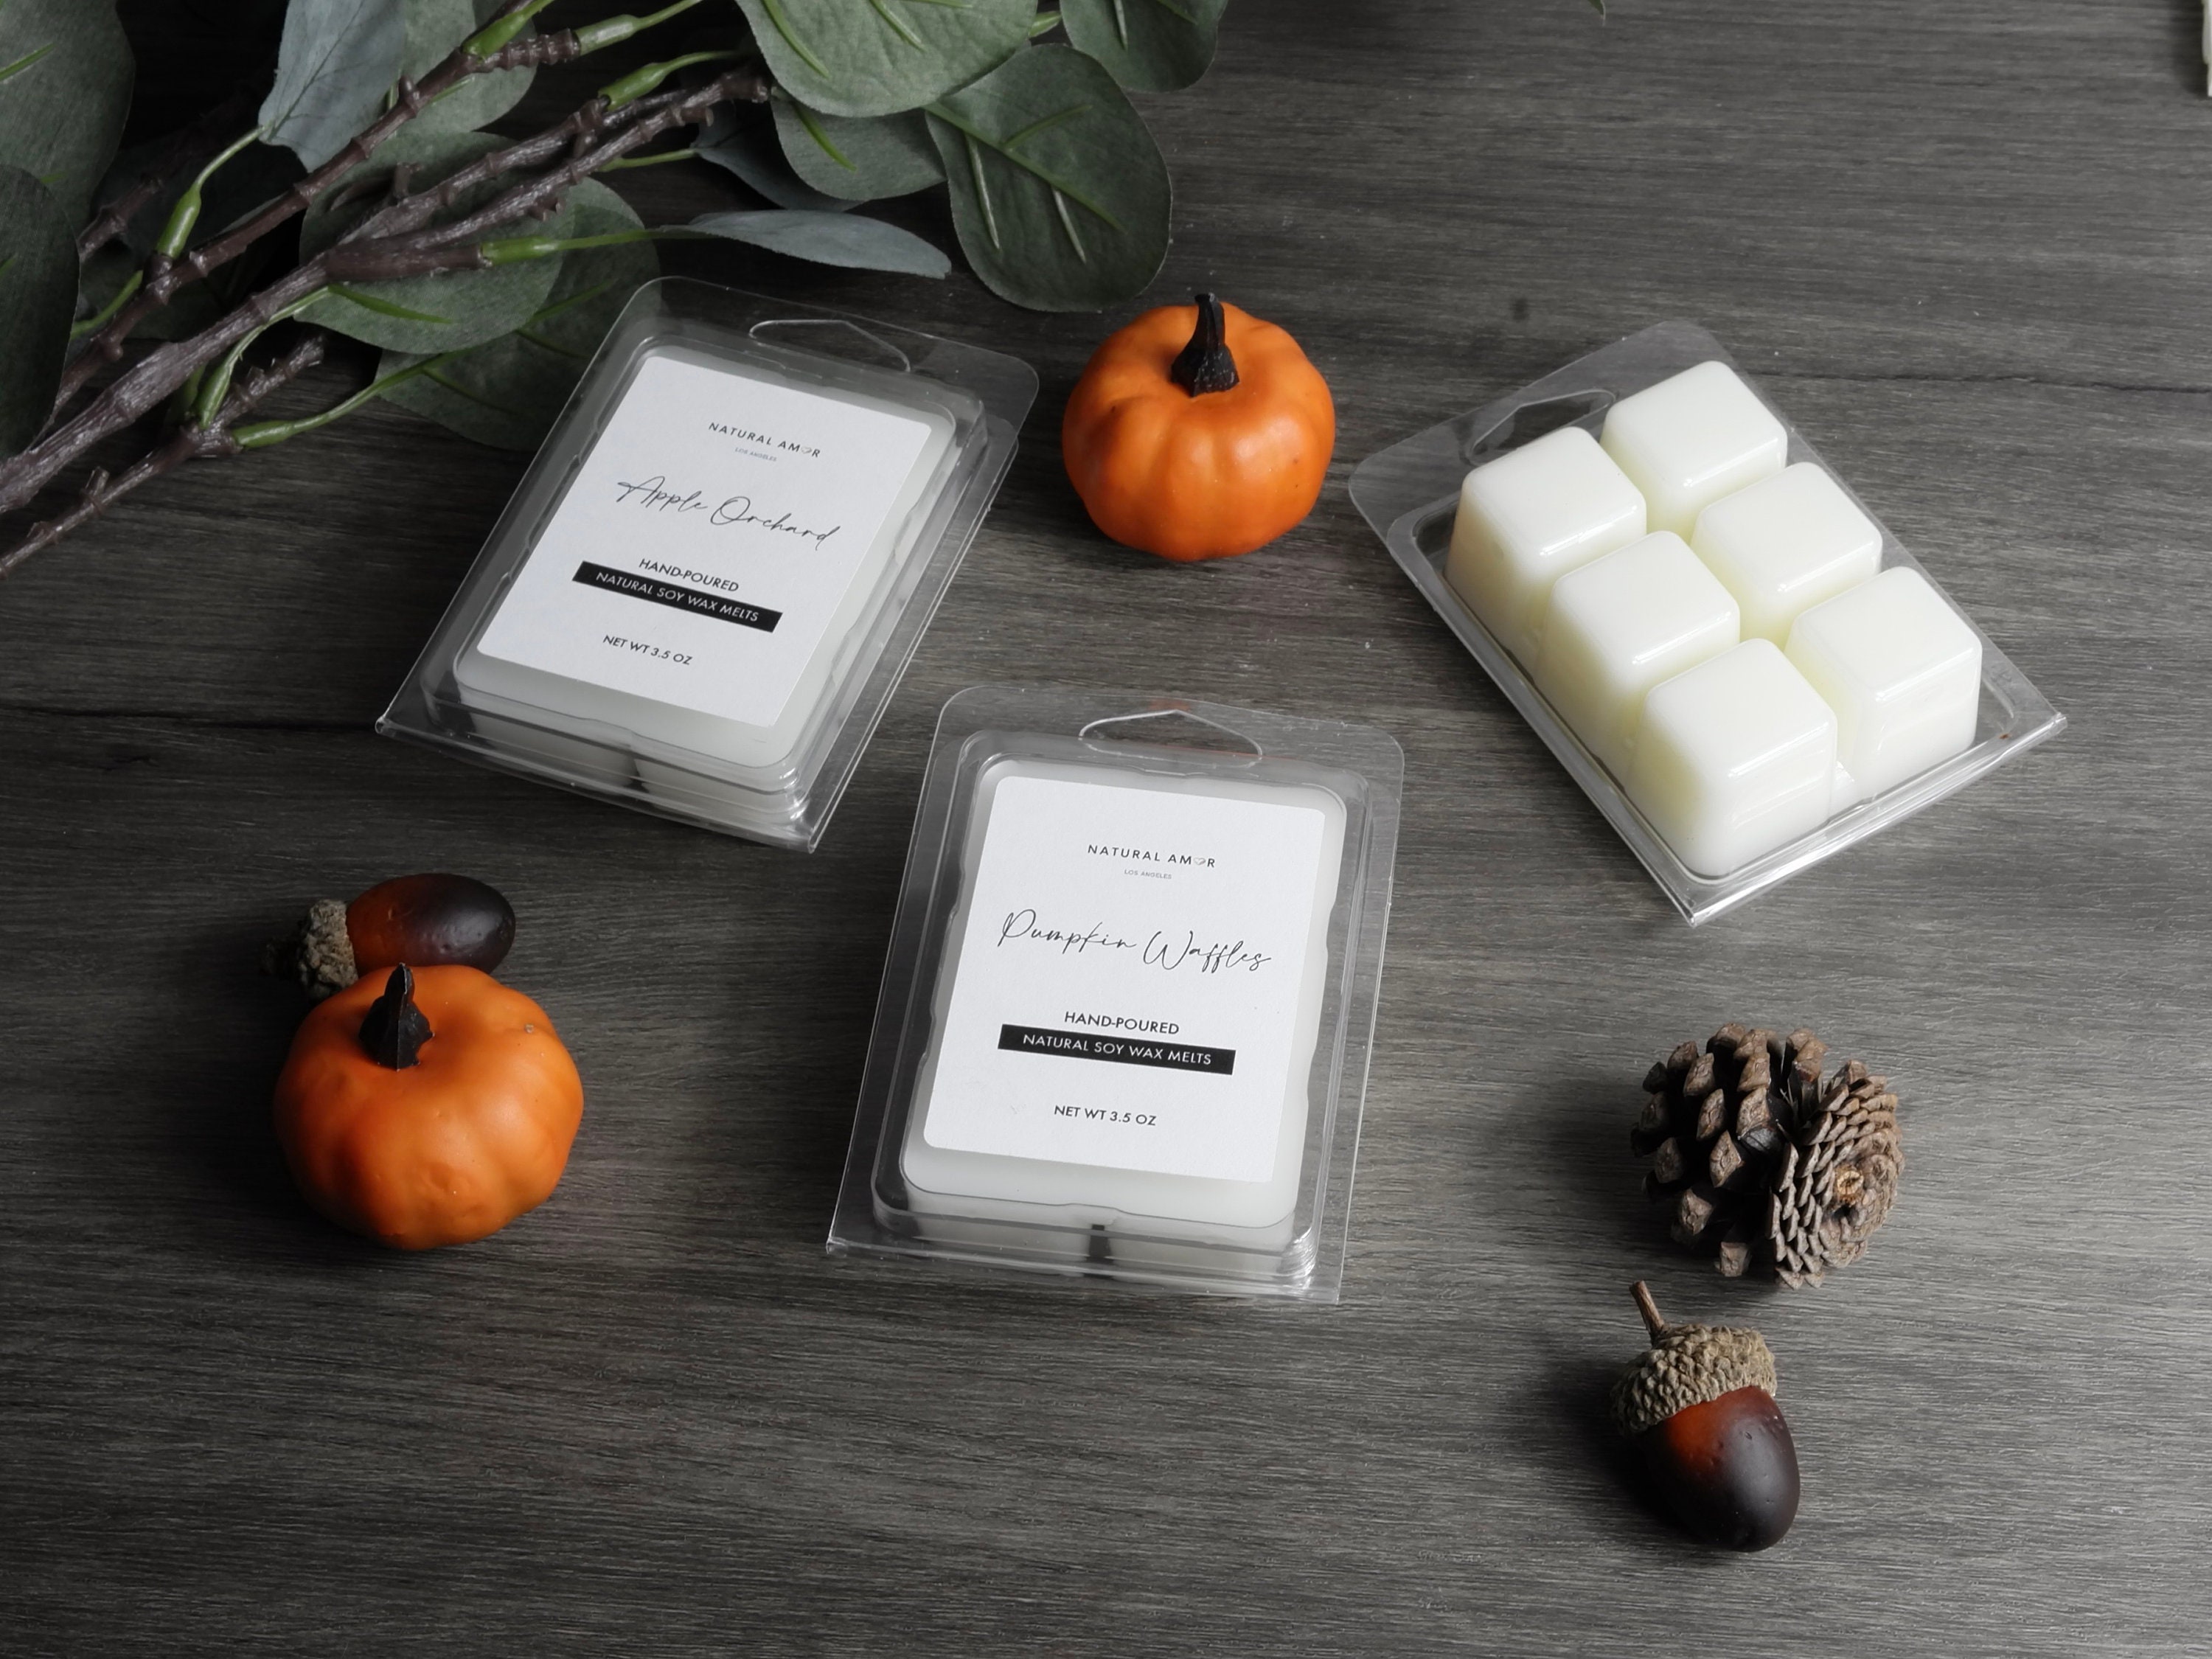  Lavender Essential Oil - Scented Wax Melts for Wax Warmers -  Made with Soy Wax - Handmade in The USA - 2 Pack Set of 6 Melt Cubes -  Candeo Candle